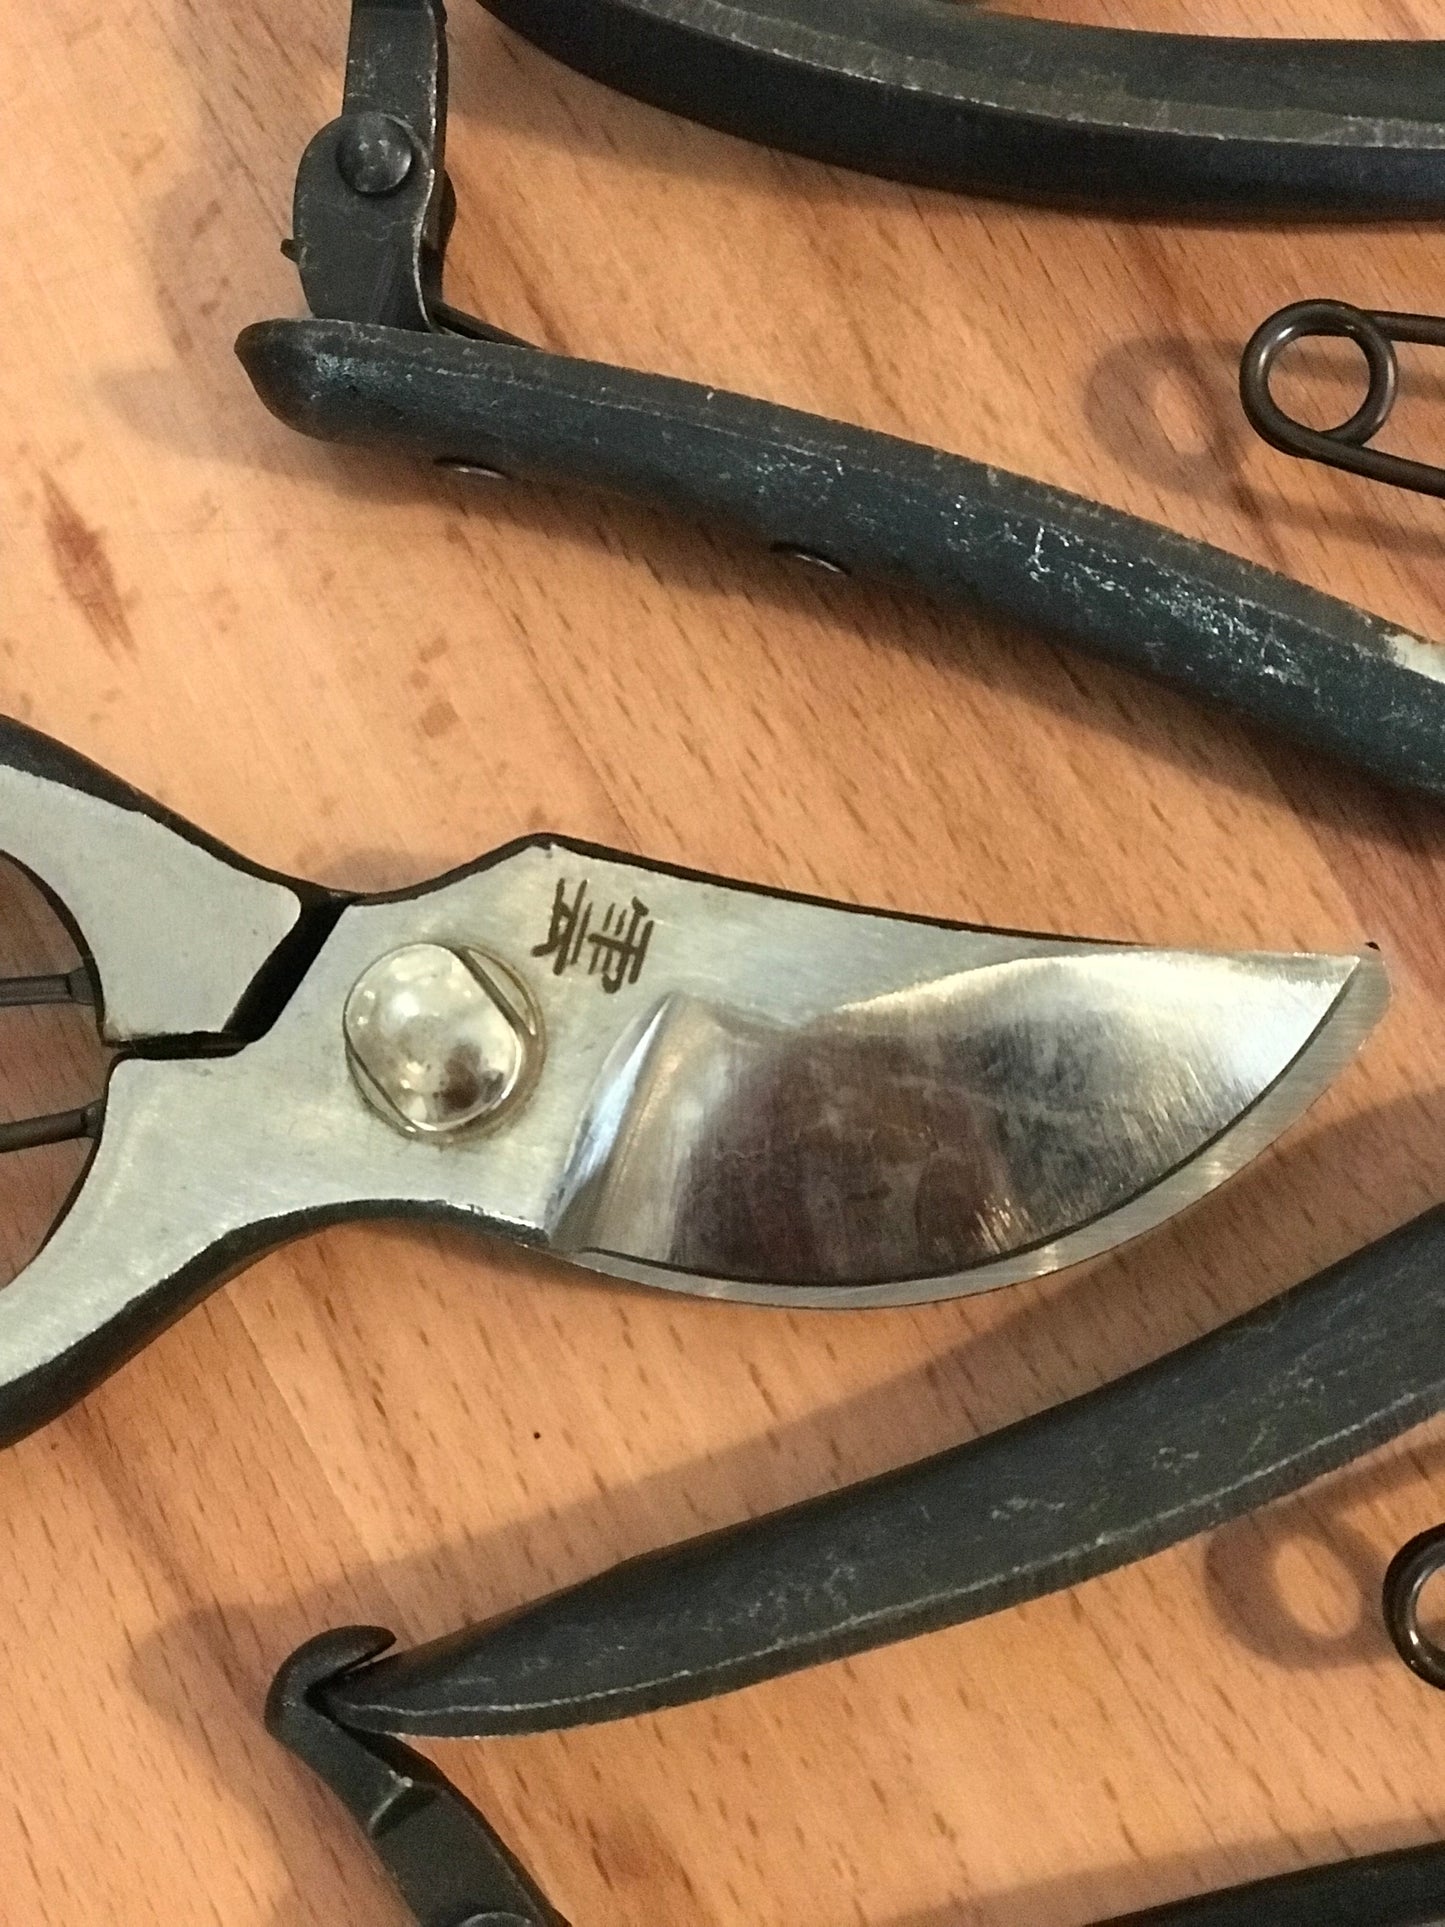 Japanese Style Forged Steel Secateurs sheers